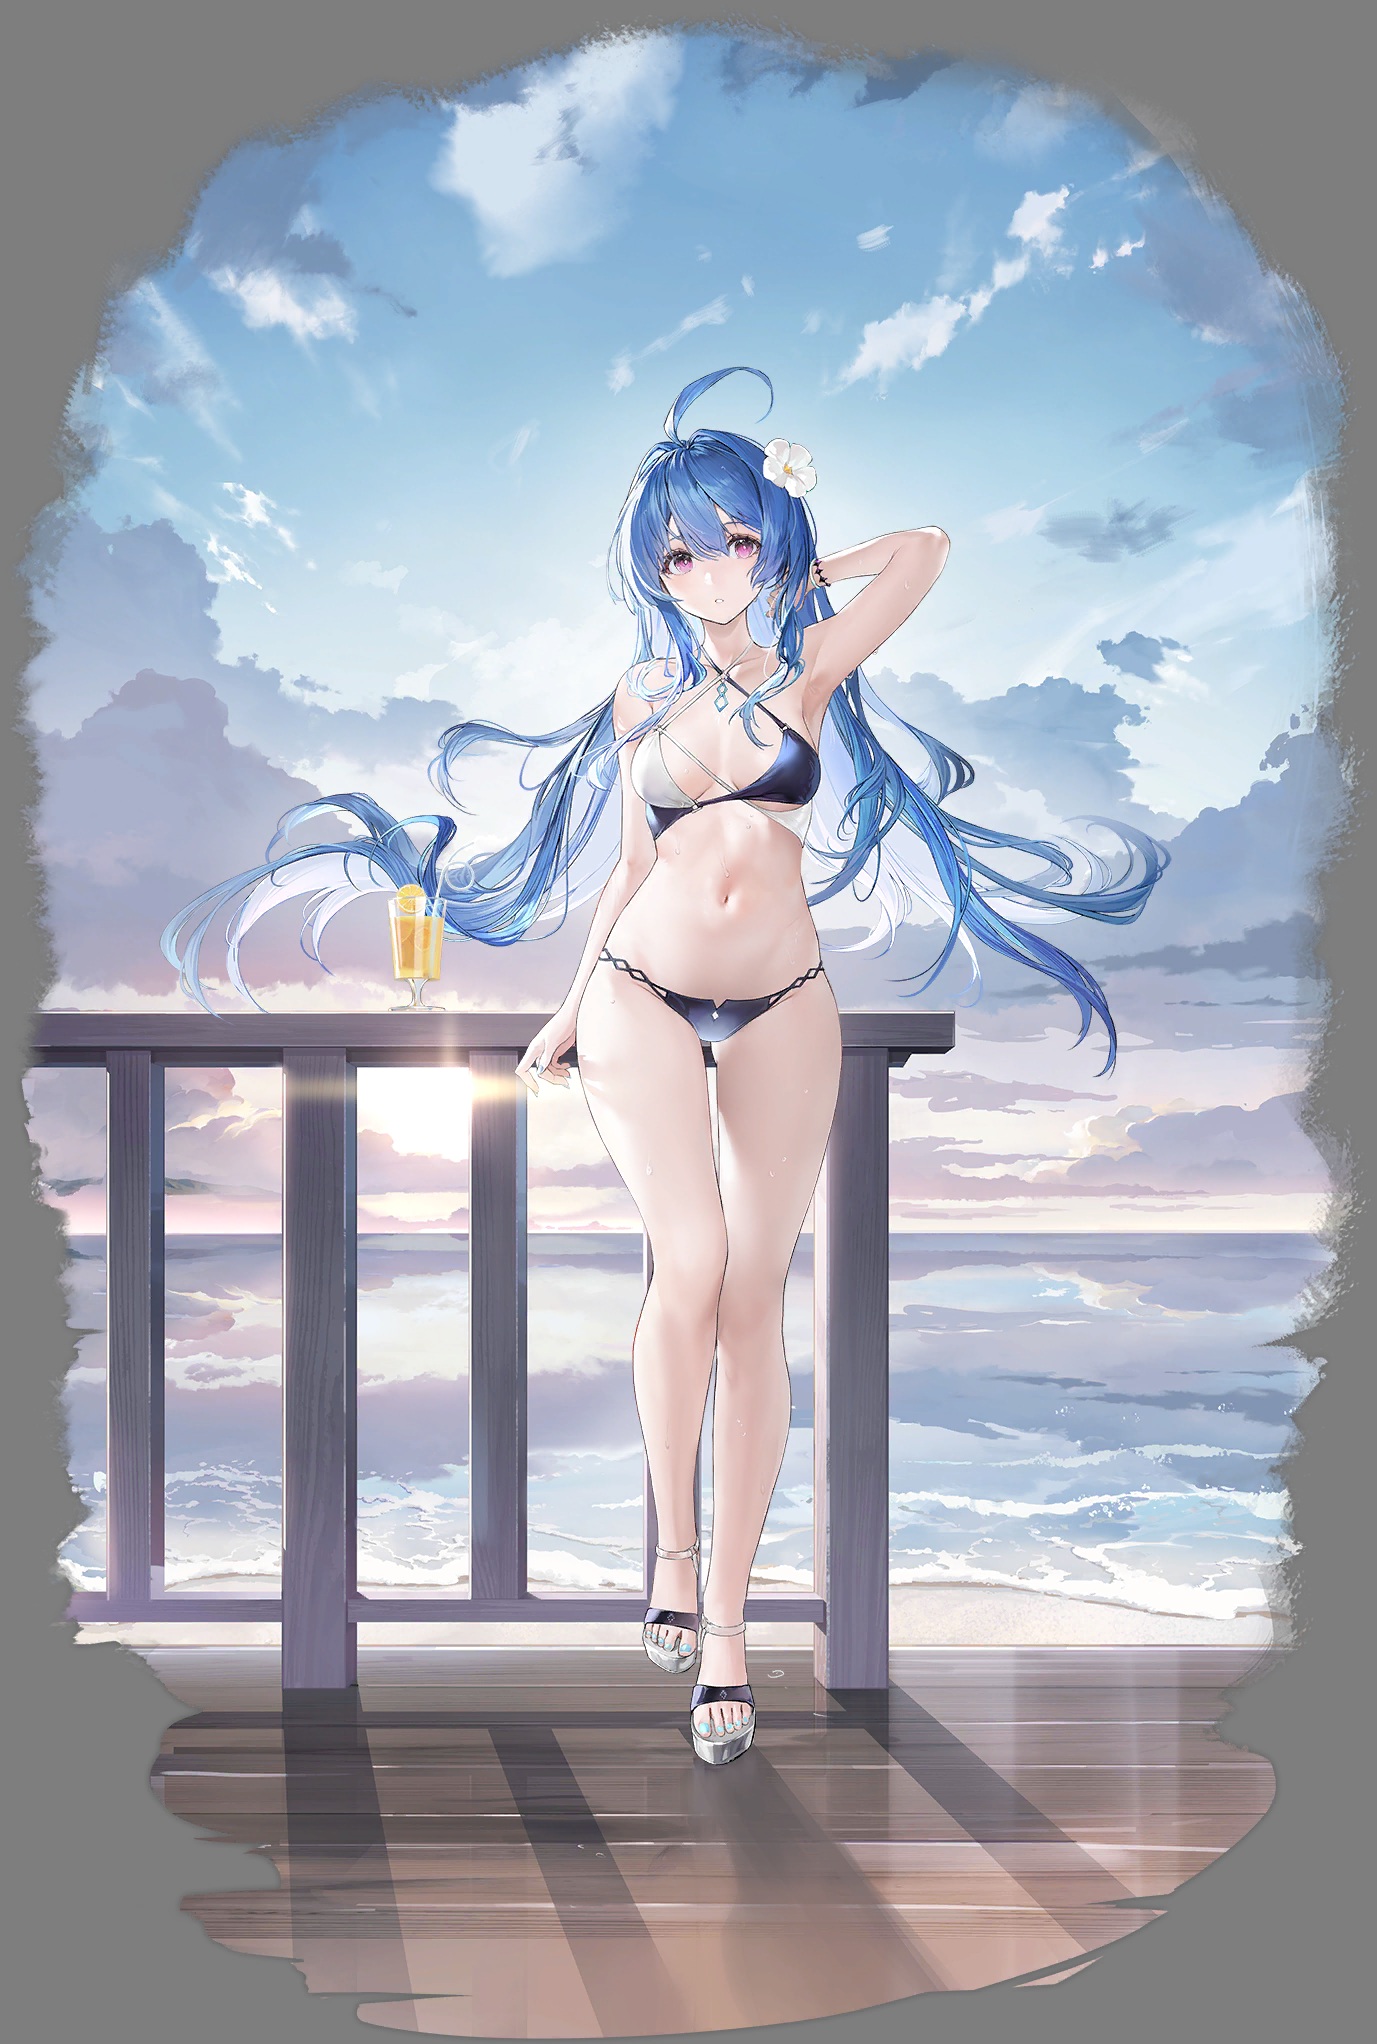 Anime 1377x2044 Azur Lane swimwear anime girls portrait display Helena (Azur Lane) drink looking at viewer ahoge pink hair blue eyes Haori Iori cocktails belly button belly sky flower in hair hibiscus clouds white flowers sea transparent background hair blowing in the wind cleavage sandals bracelets big boobs hands in hair armpits long hair black bikinis frontal view cyan nails beach women outdoors simple background legs